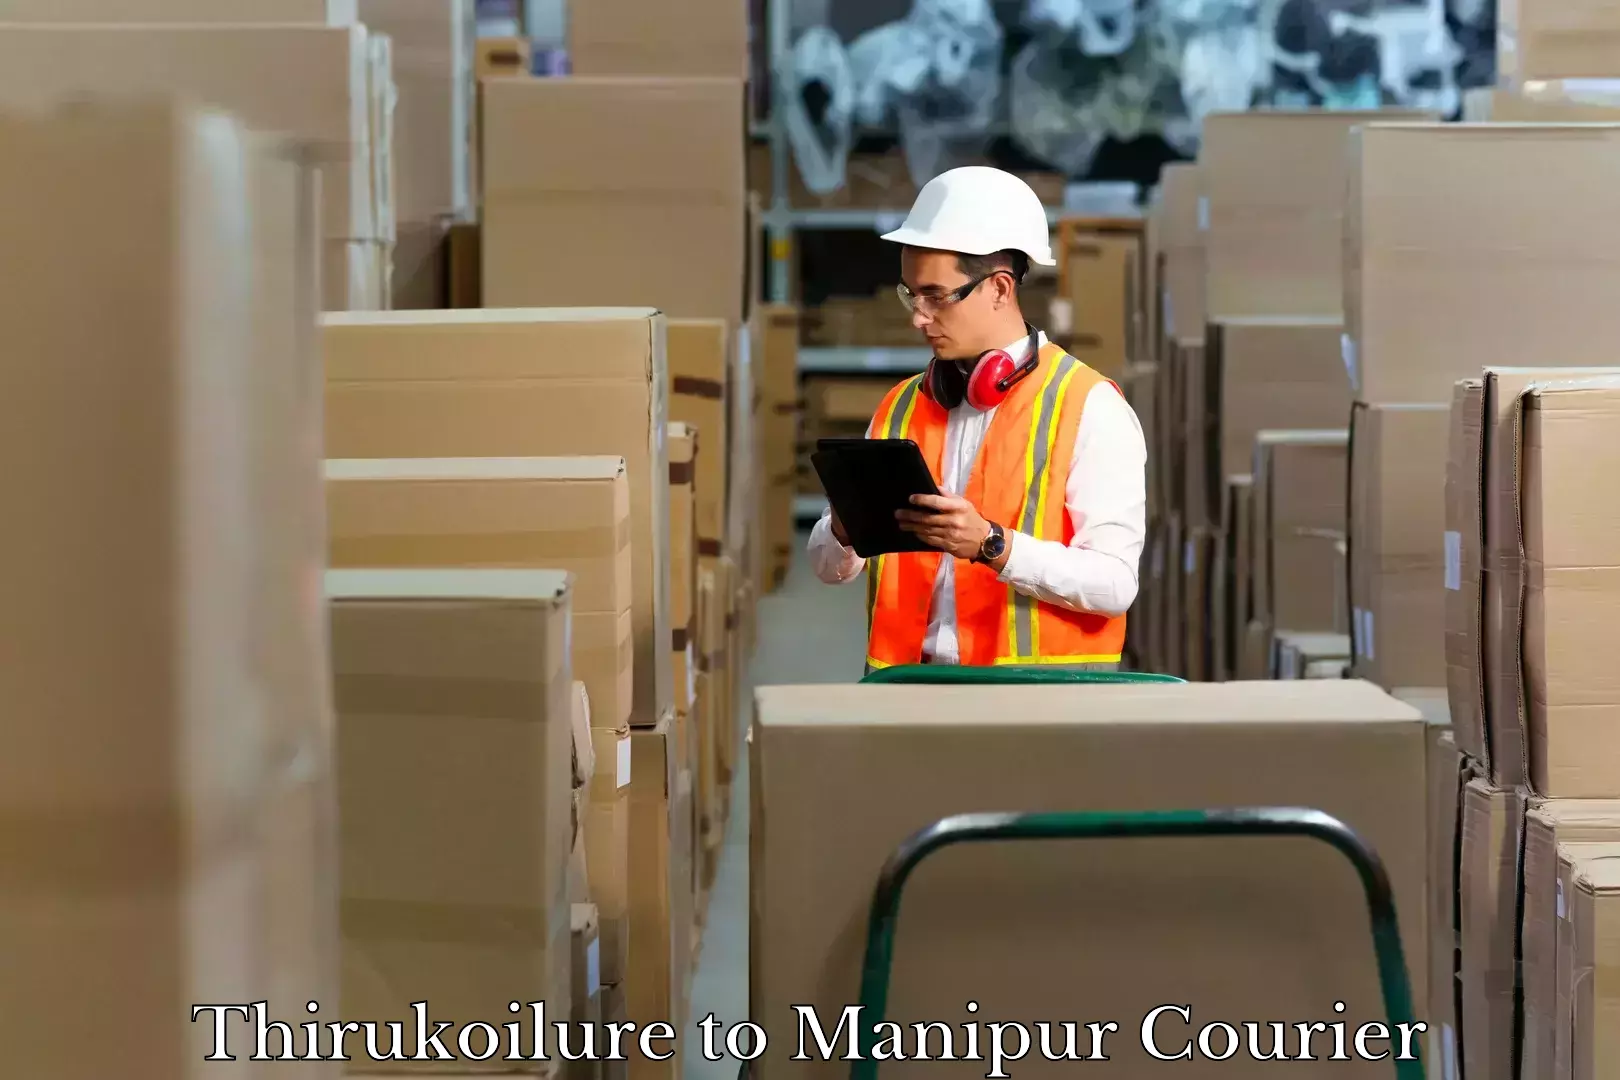 Baggage delivery technology Thirukoilure to Manipur